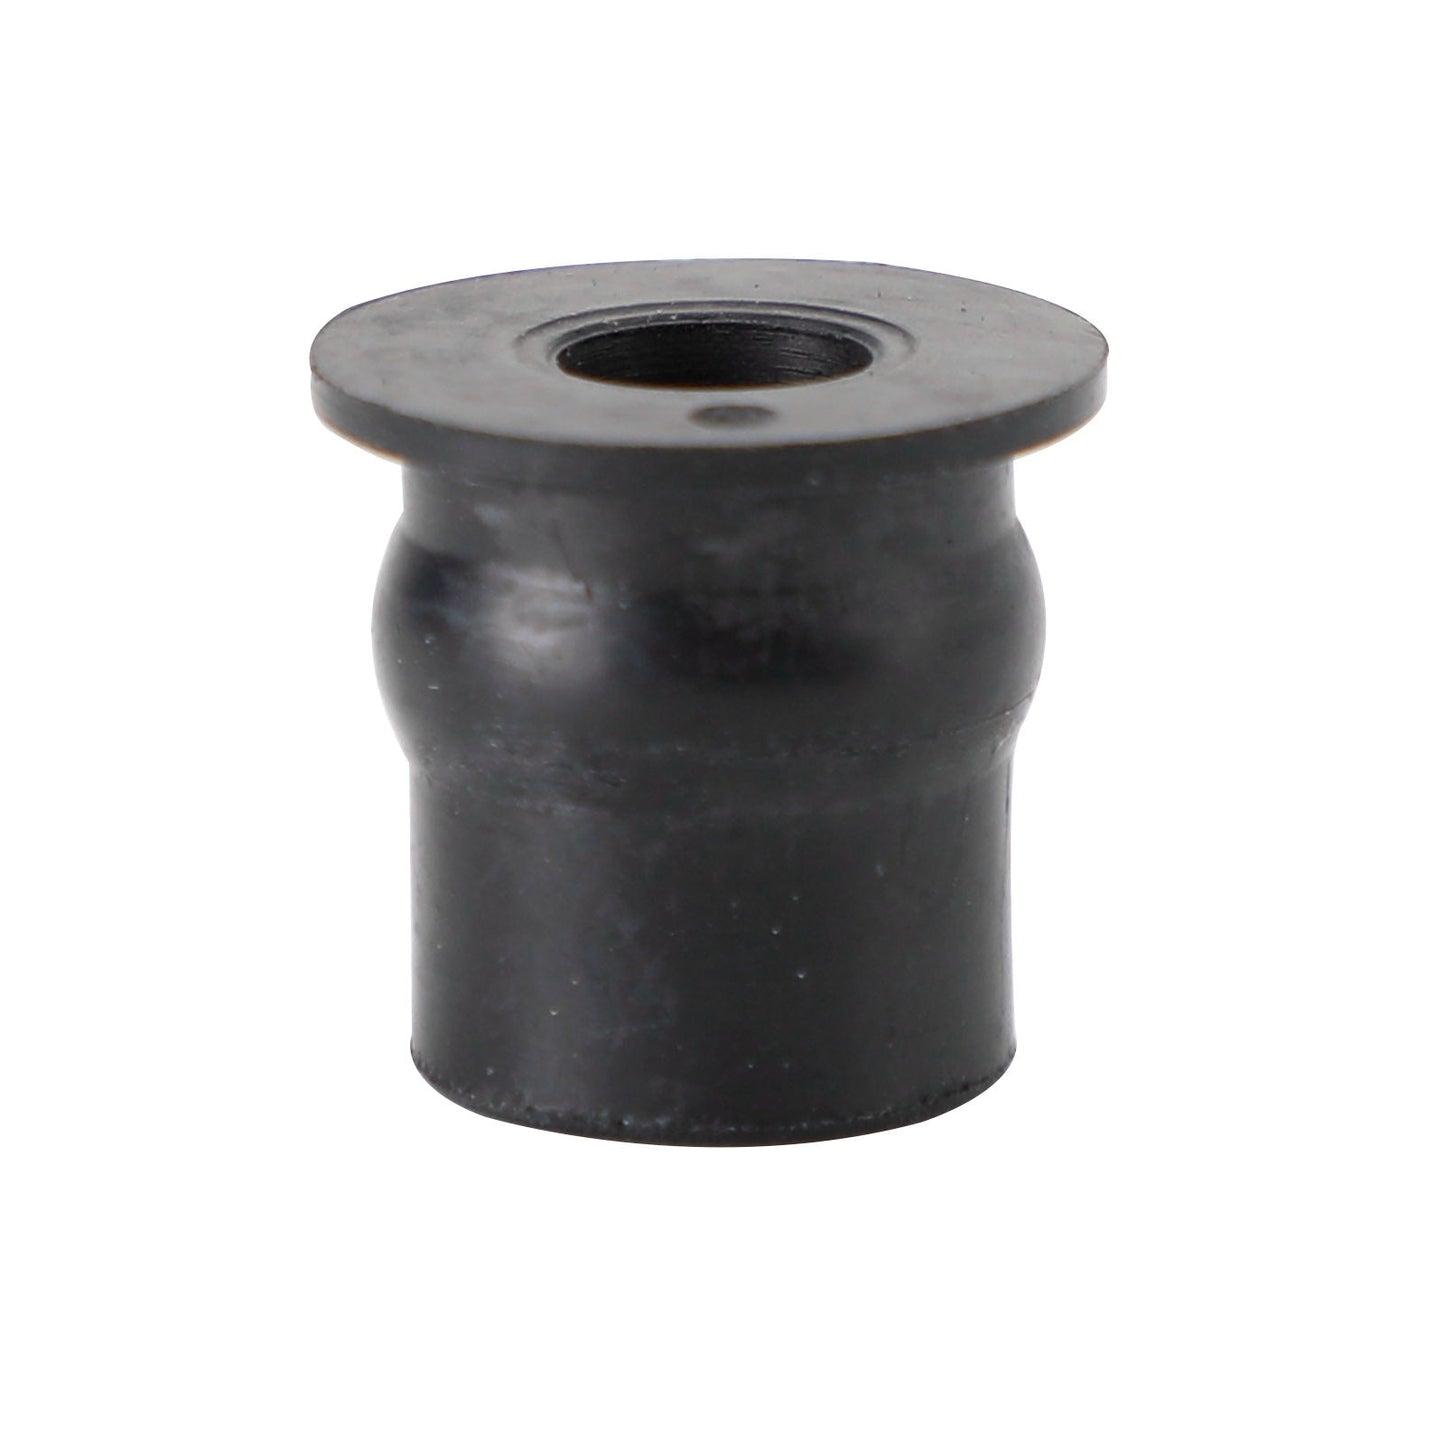 M6 Rubber Well Nuts Wellnuts for Fairing & Screen Fixing Pack of 100 - 13mm Hole